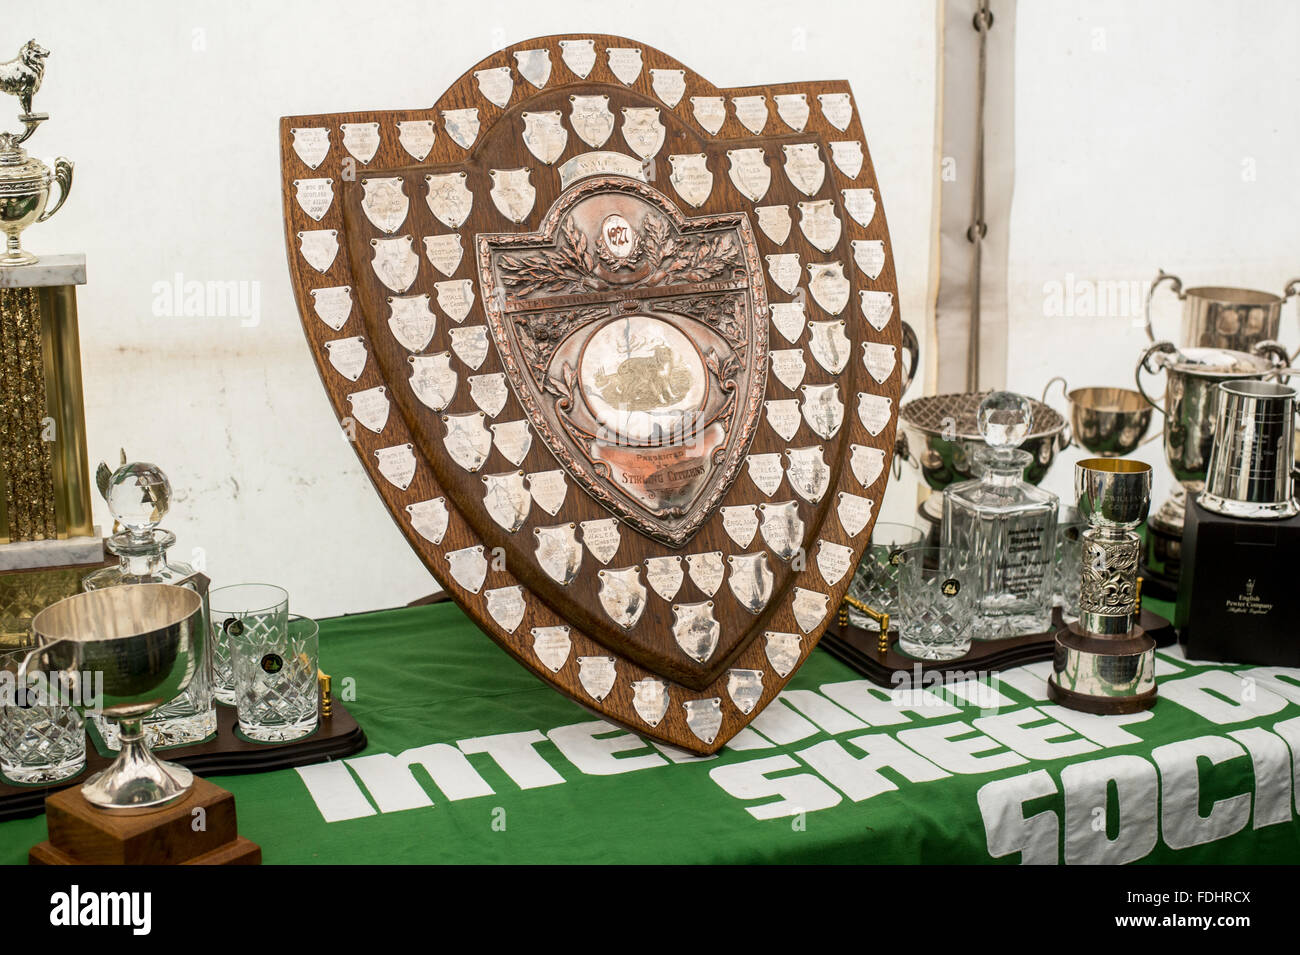 Silver Trophies at the International Sheepdog Trials in Moffat , Scotland, UK. Stock Photo